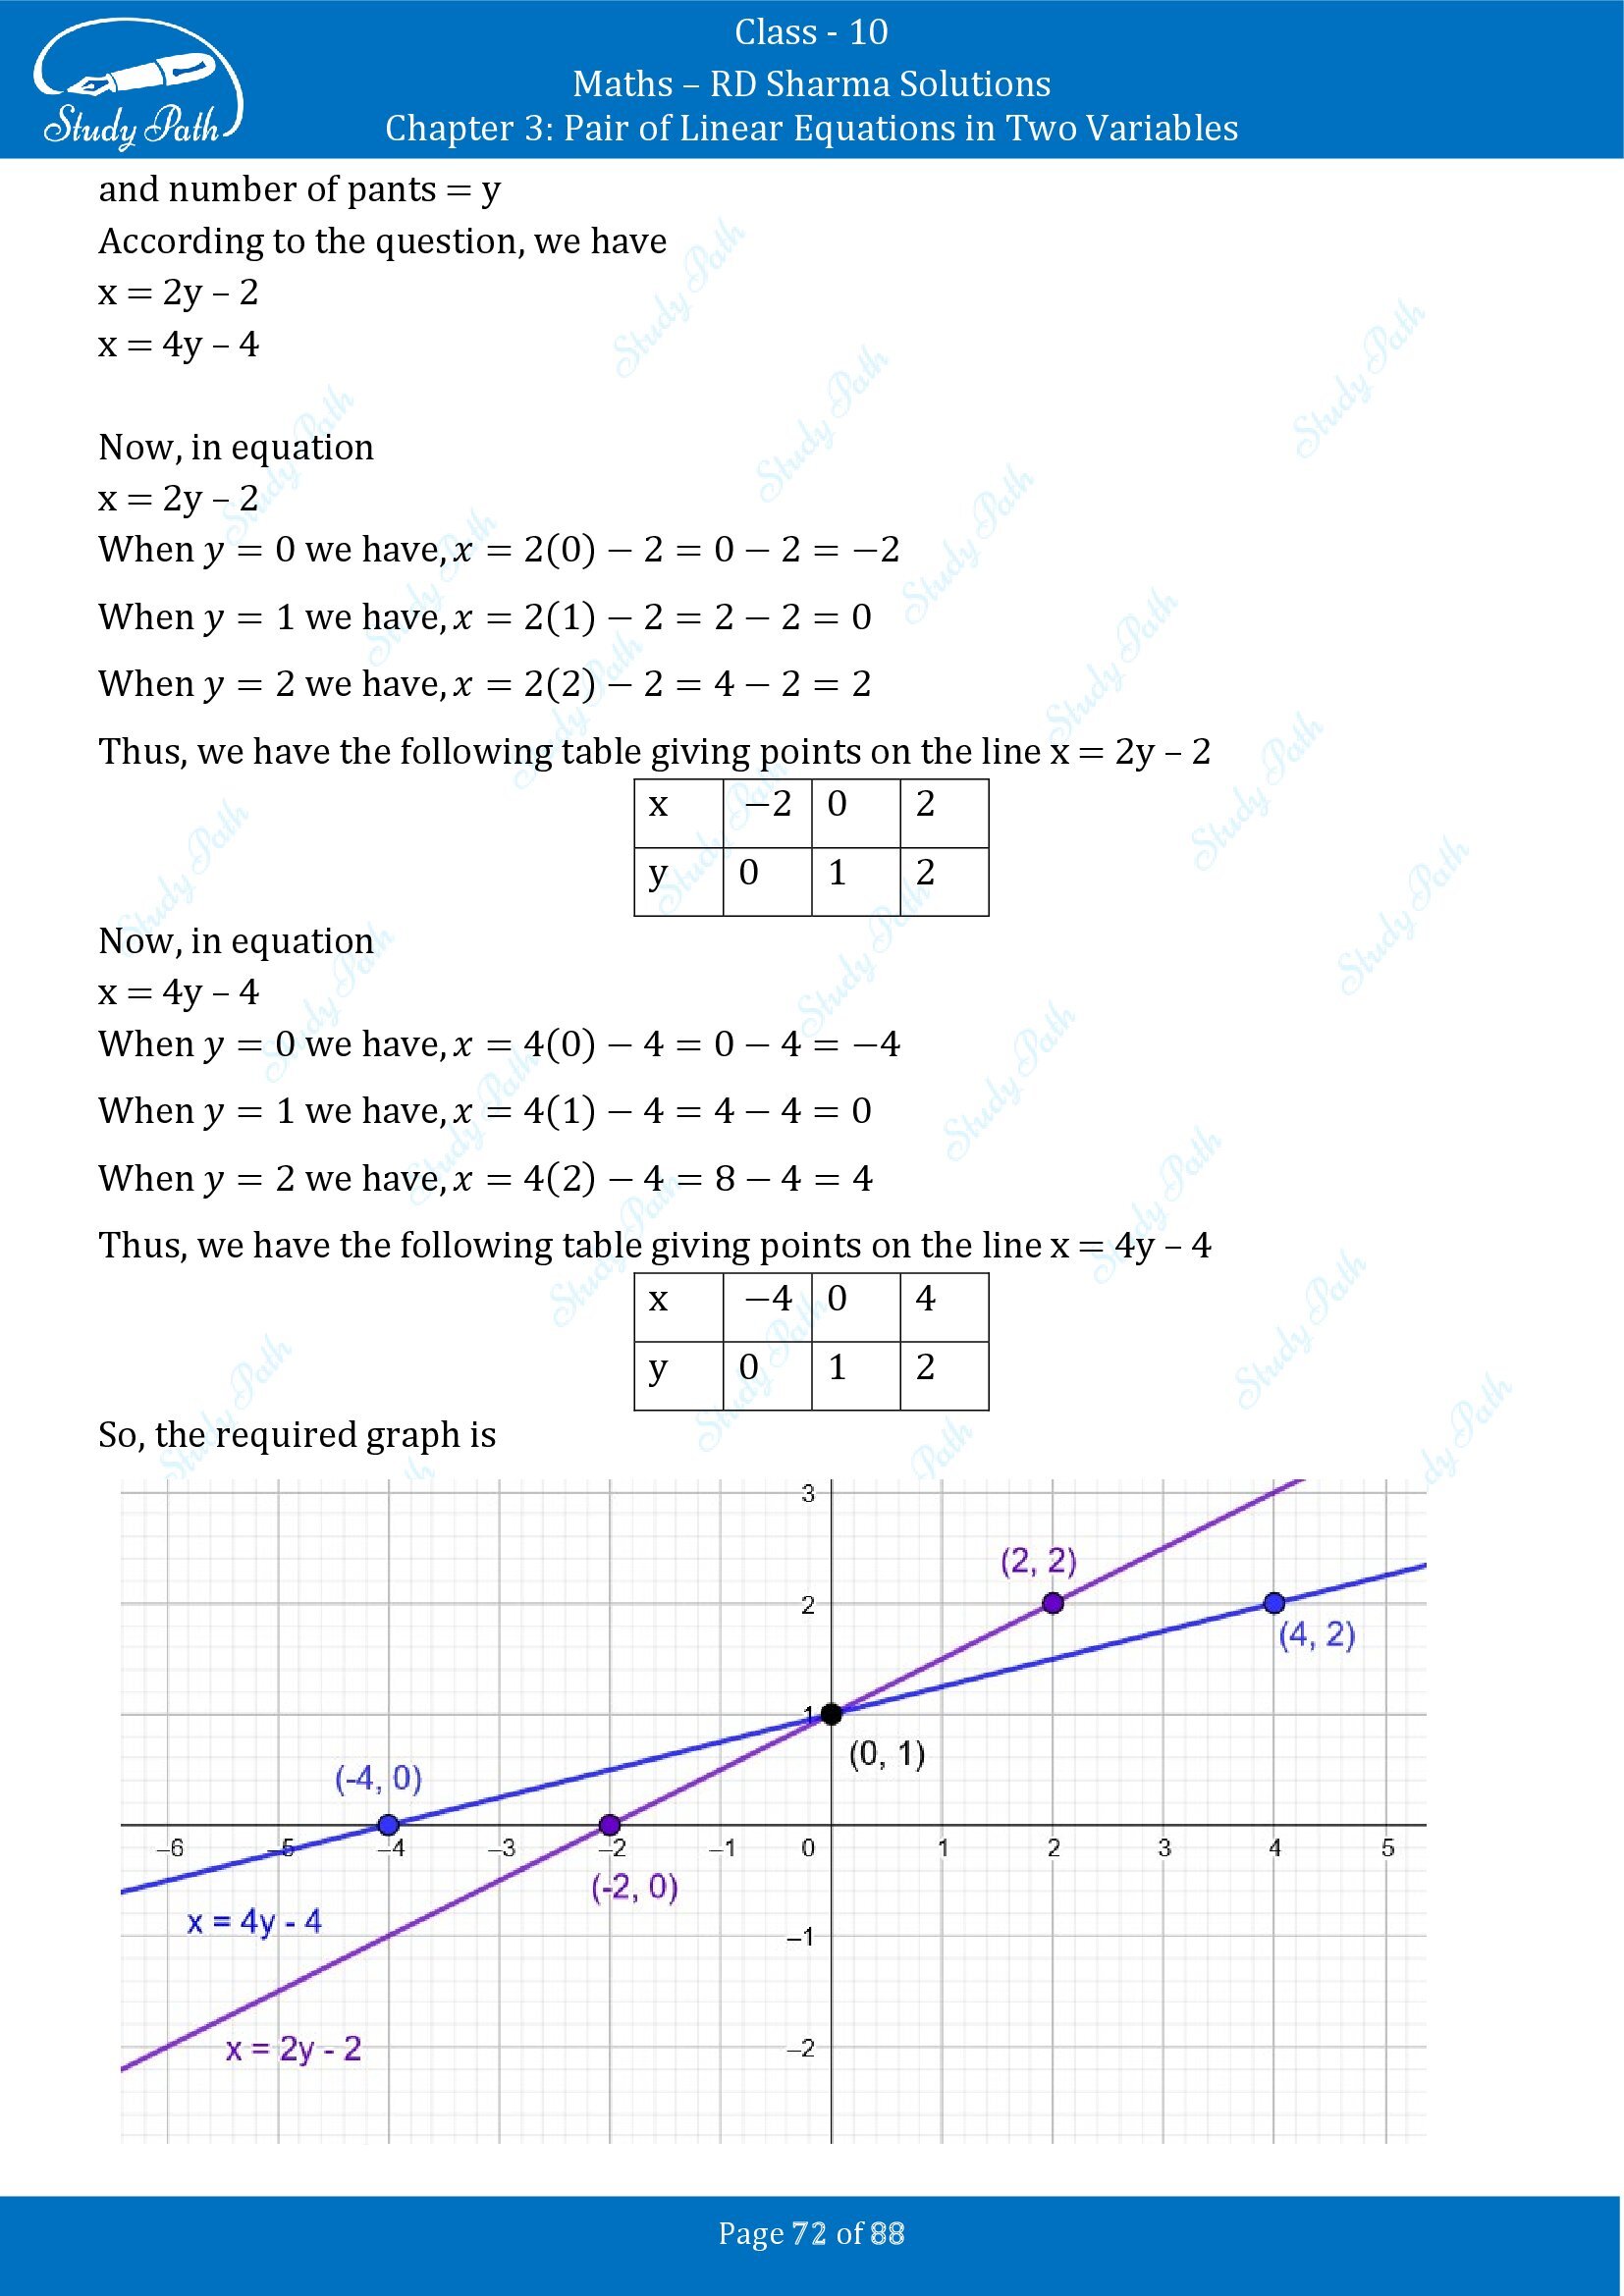 RD Sharma Solutions Class 10 Chapter 3 Pair of Linear Equations in Two Variables Exercise 3.2 00072